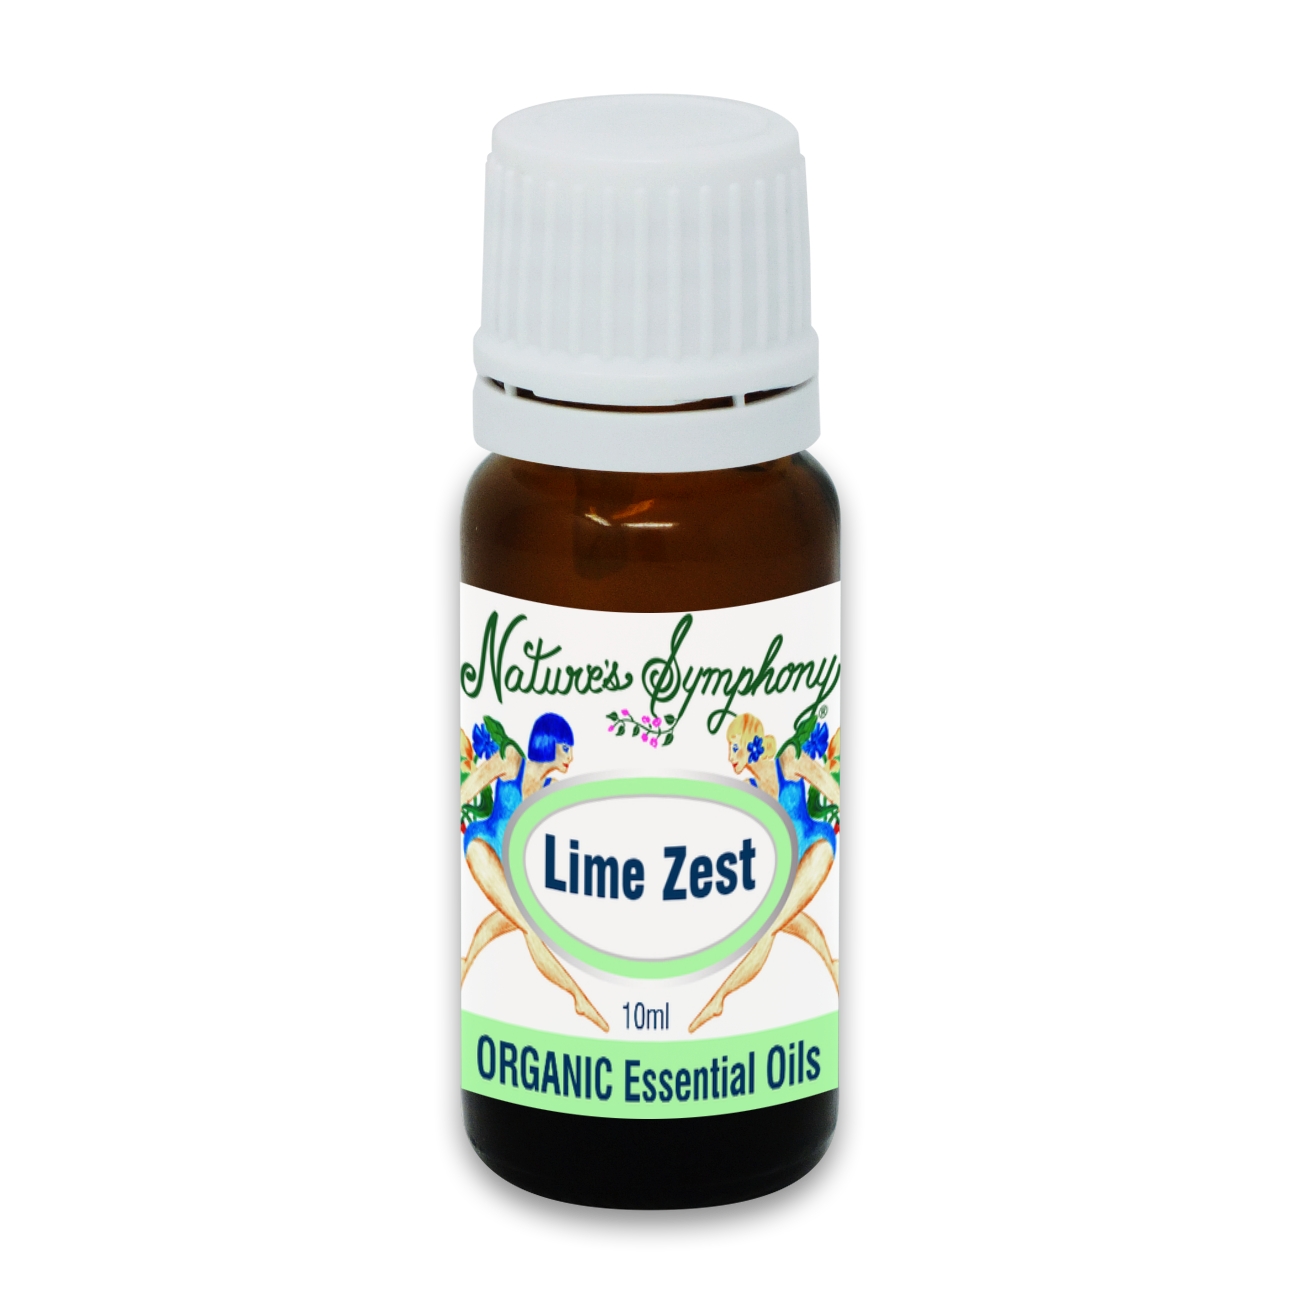 Lime Zest, Organic/Wildcrafted oil - 10ml